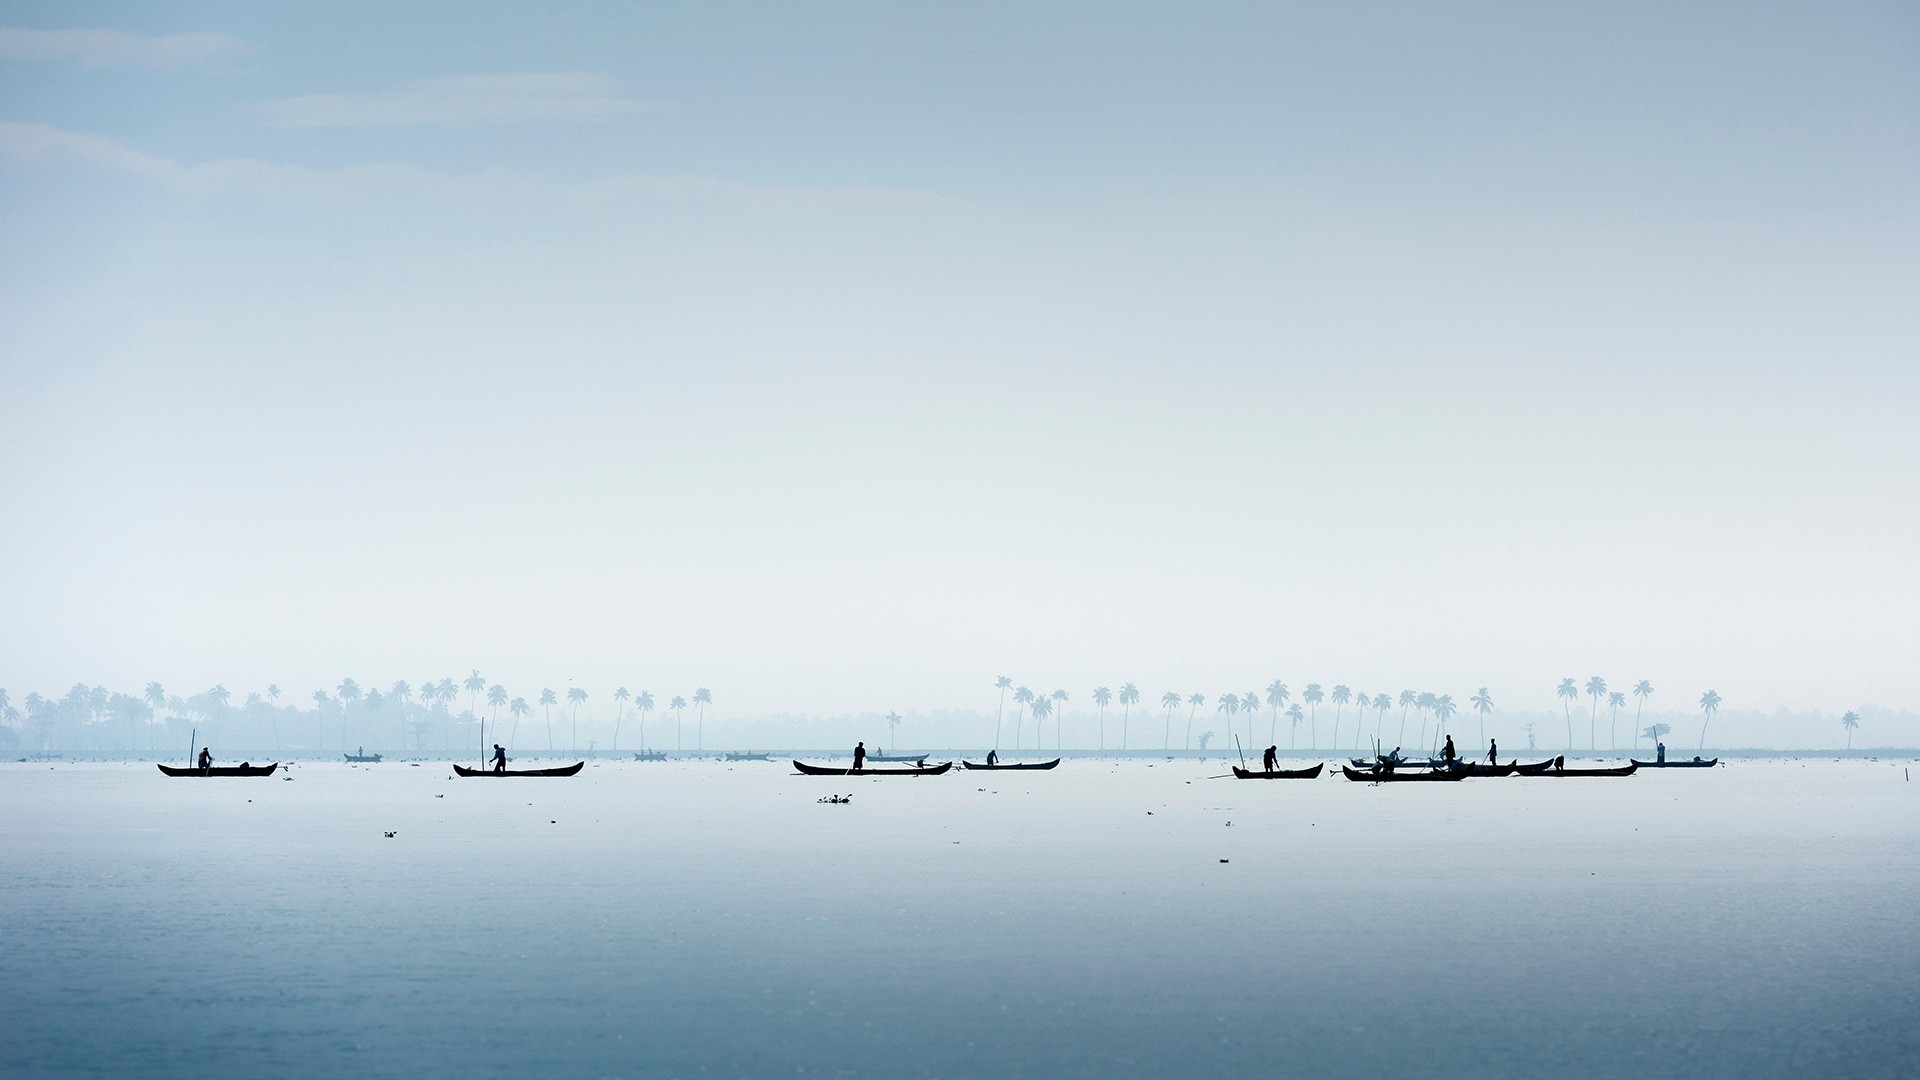 General 1920x1080 nature landscape India water lake boat men fisherman fishing palm trees minimalism sky clouds silhouette mist